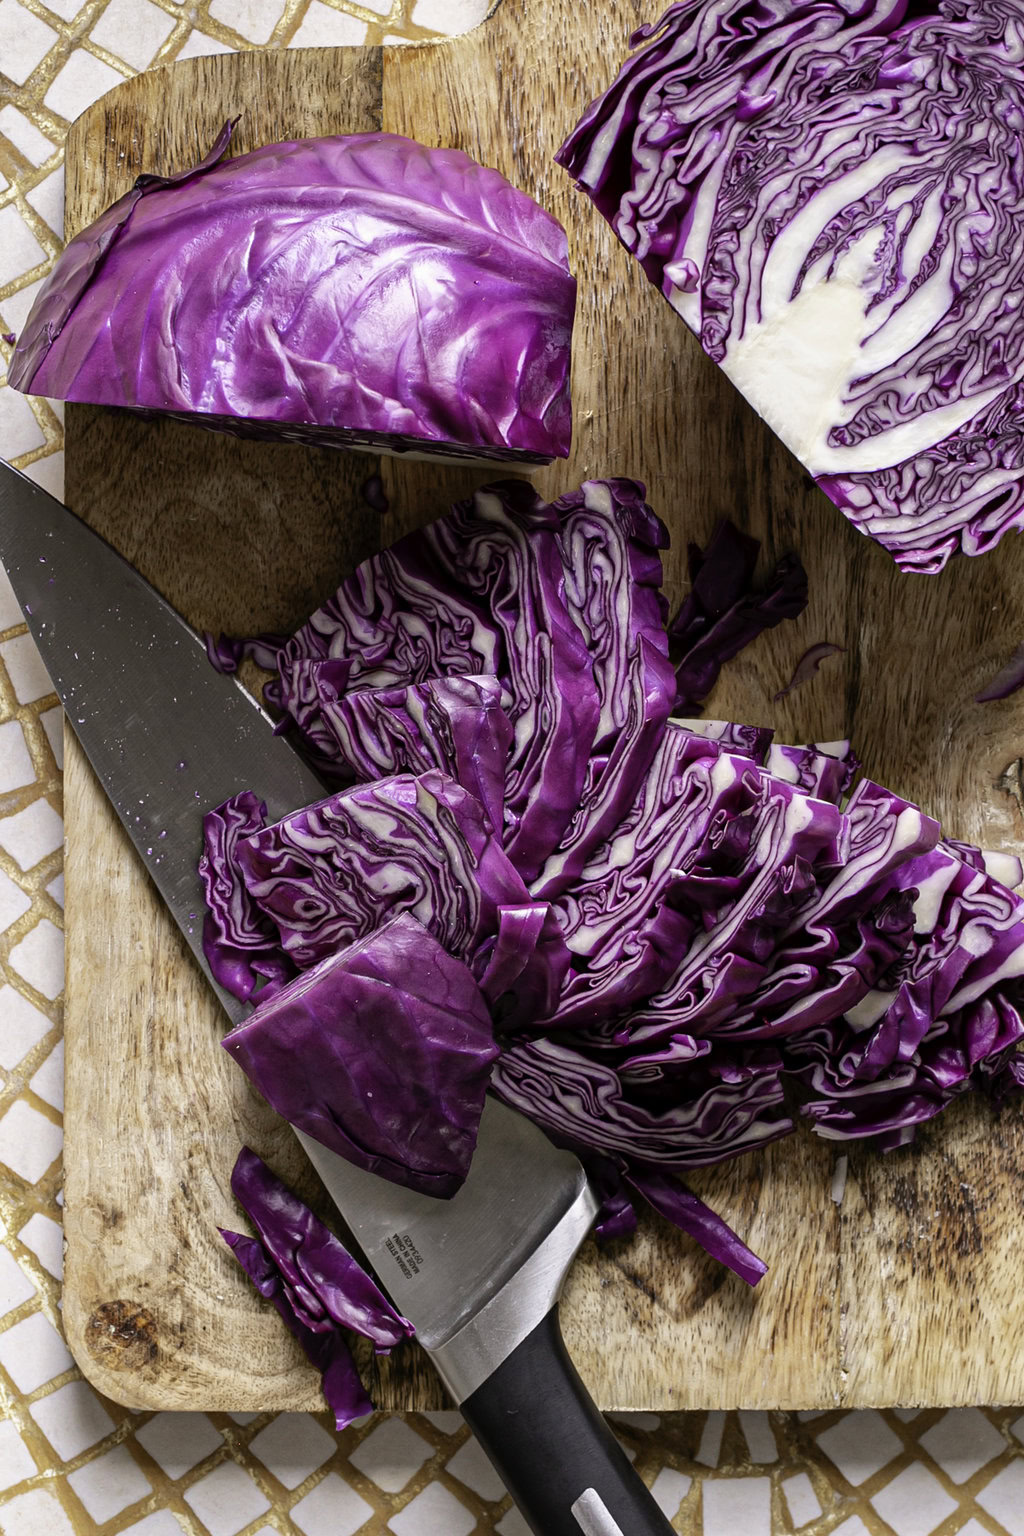 one quarter of the red cabbage sliced into pieces with the knife resting under the slices and the remaining half and quarter of red cabbage above it.